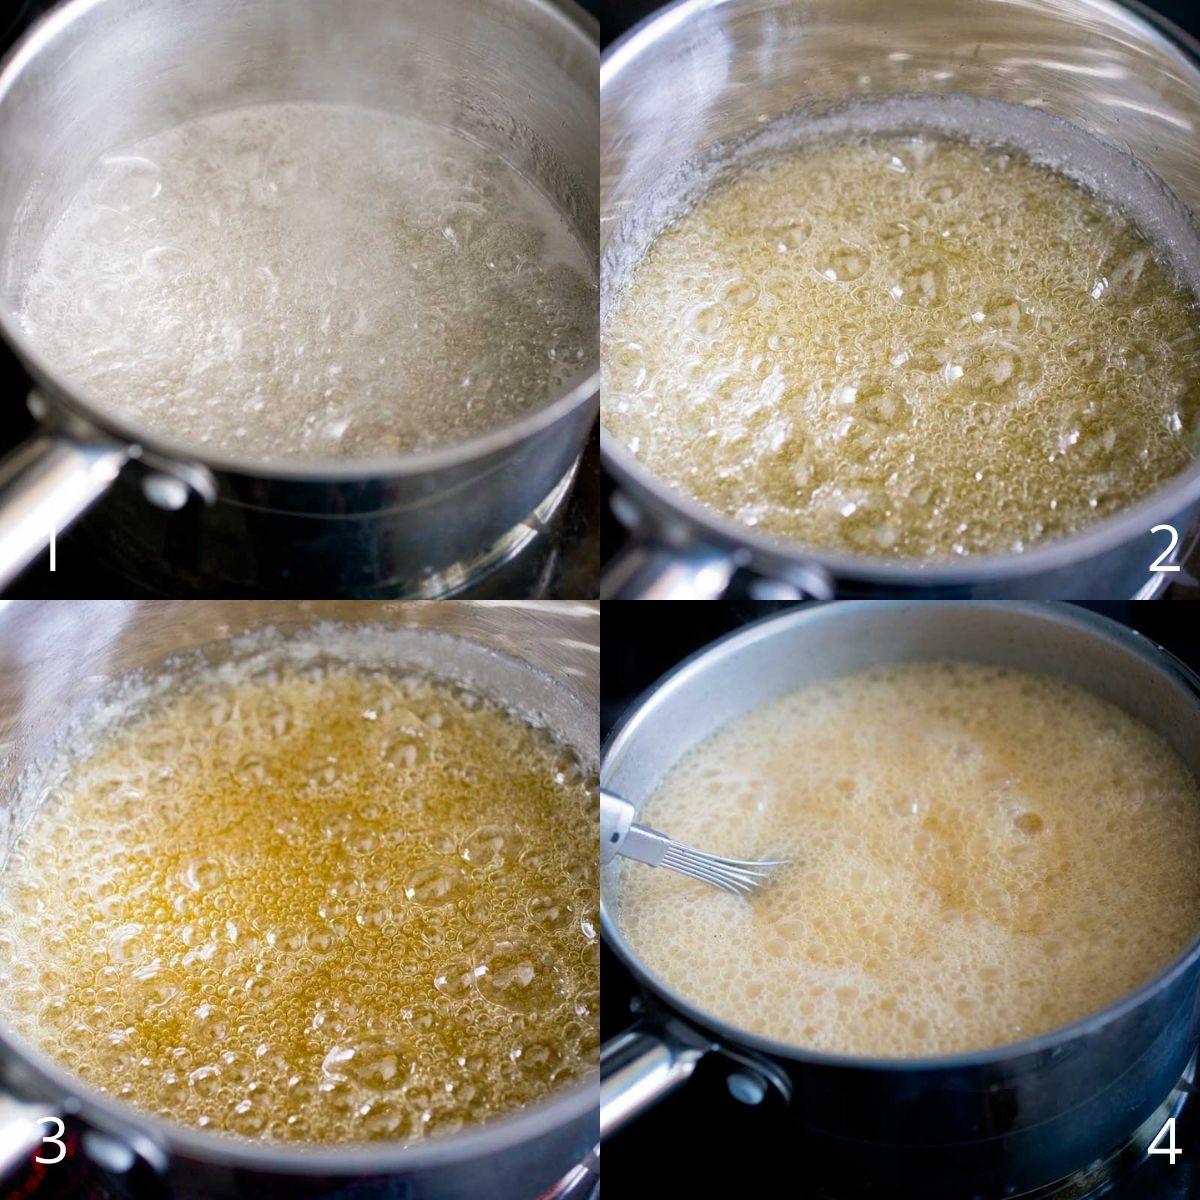 Step by step photos show how to brown the sugar for the caramel sauce.